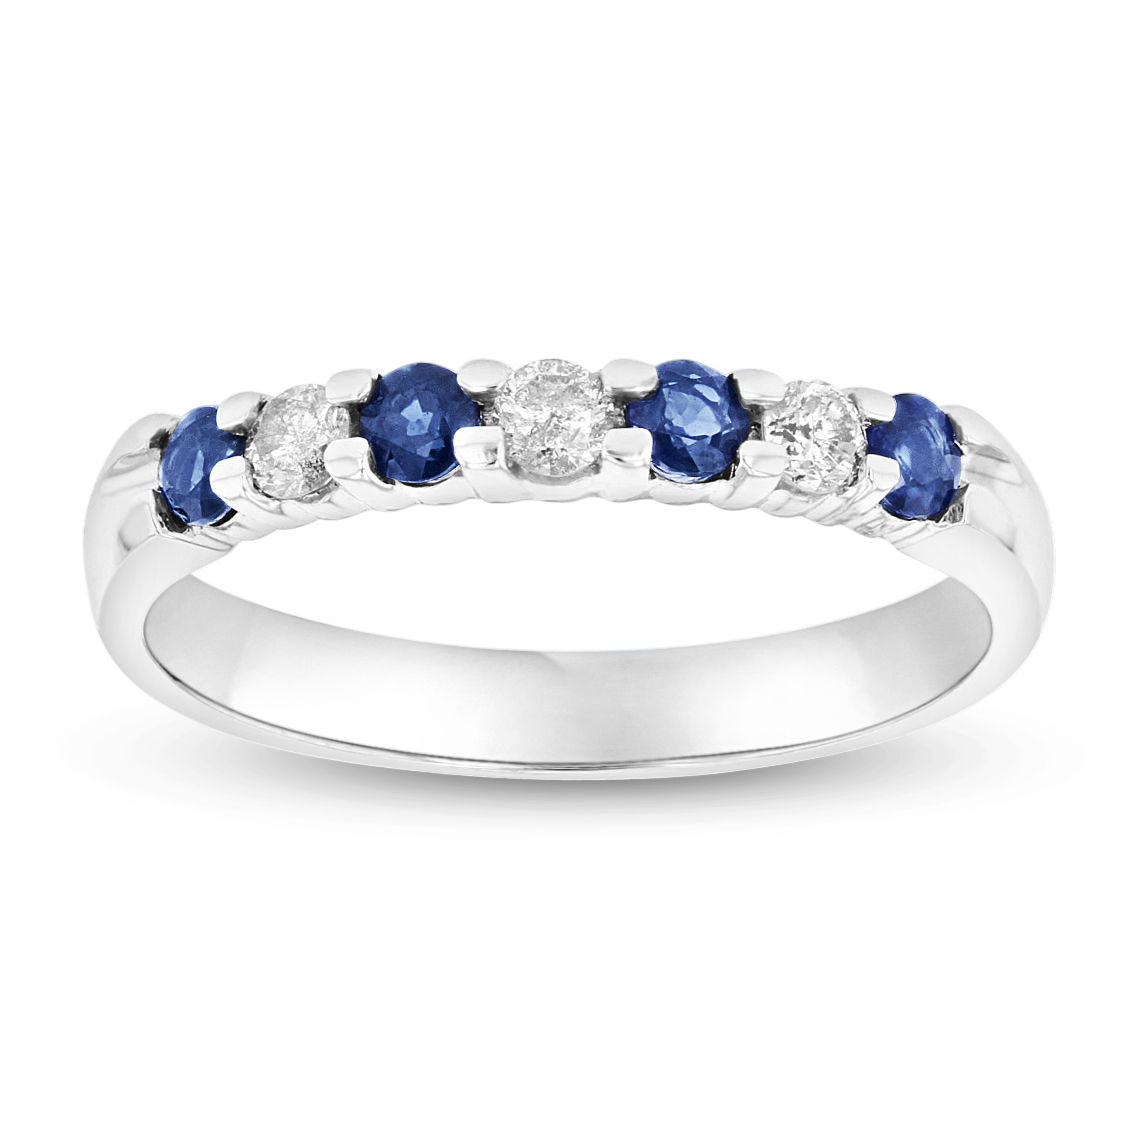 Picture of Louis Creations RL887SD-021-6.5 14K Gold 0.54 CTTW Round Diamonds & Sapphires Prong Set Band Ring - Size 6.5